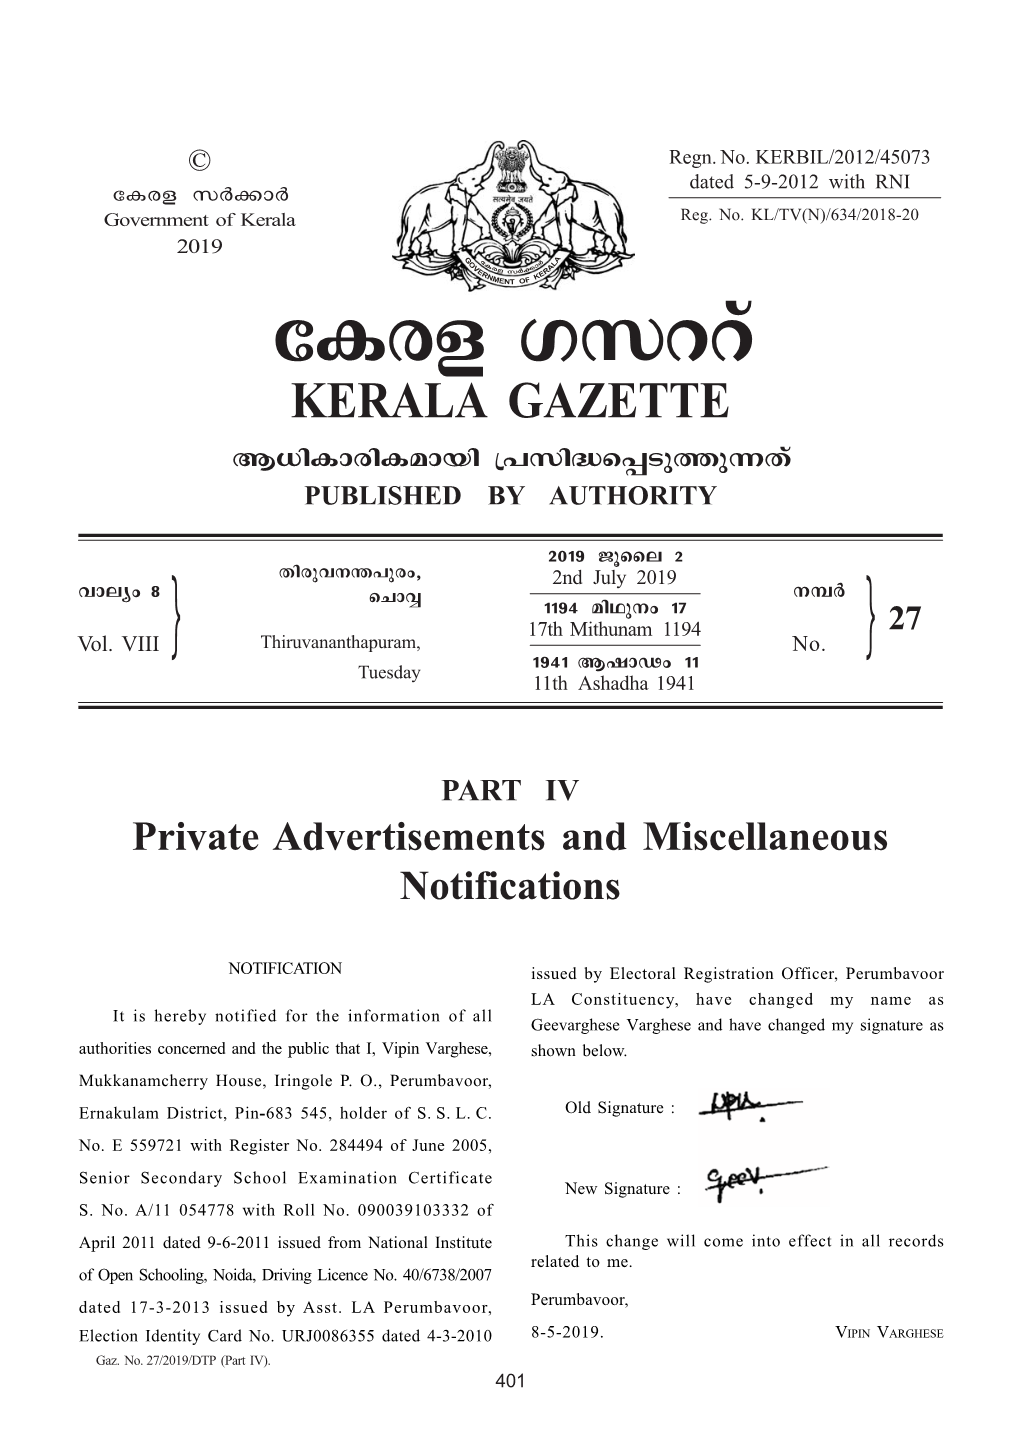 PART IV Private Advertisements and Miscellaneous Notifications